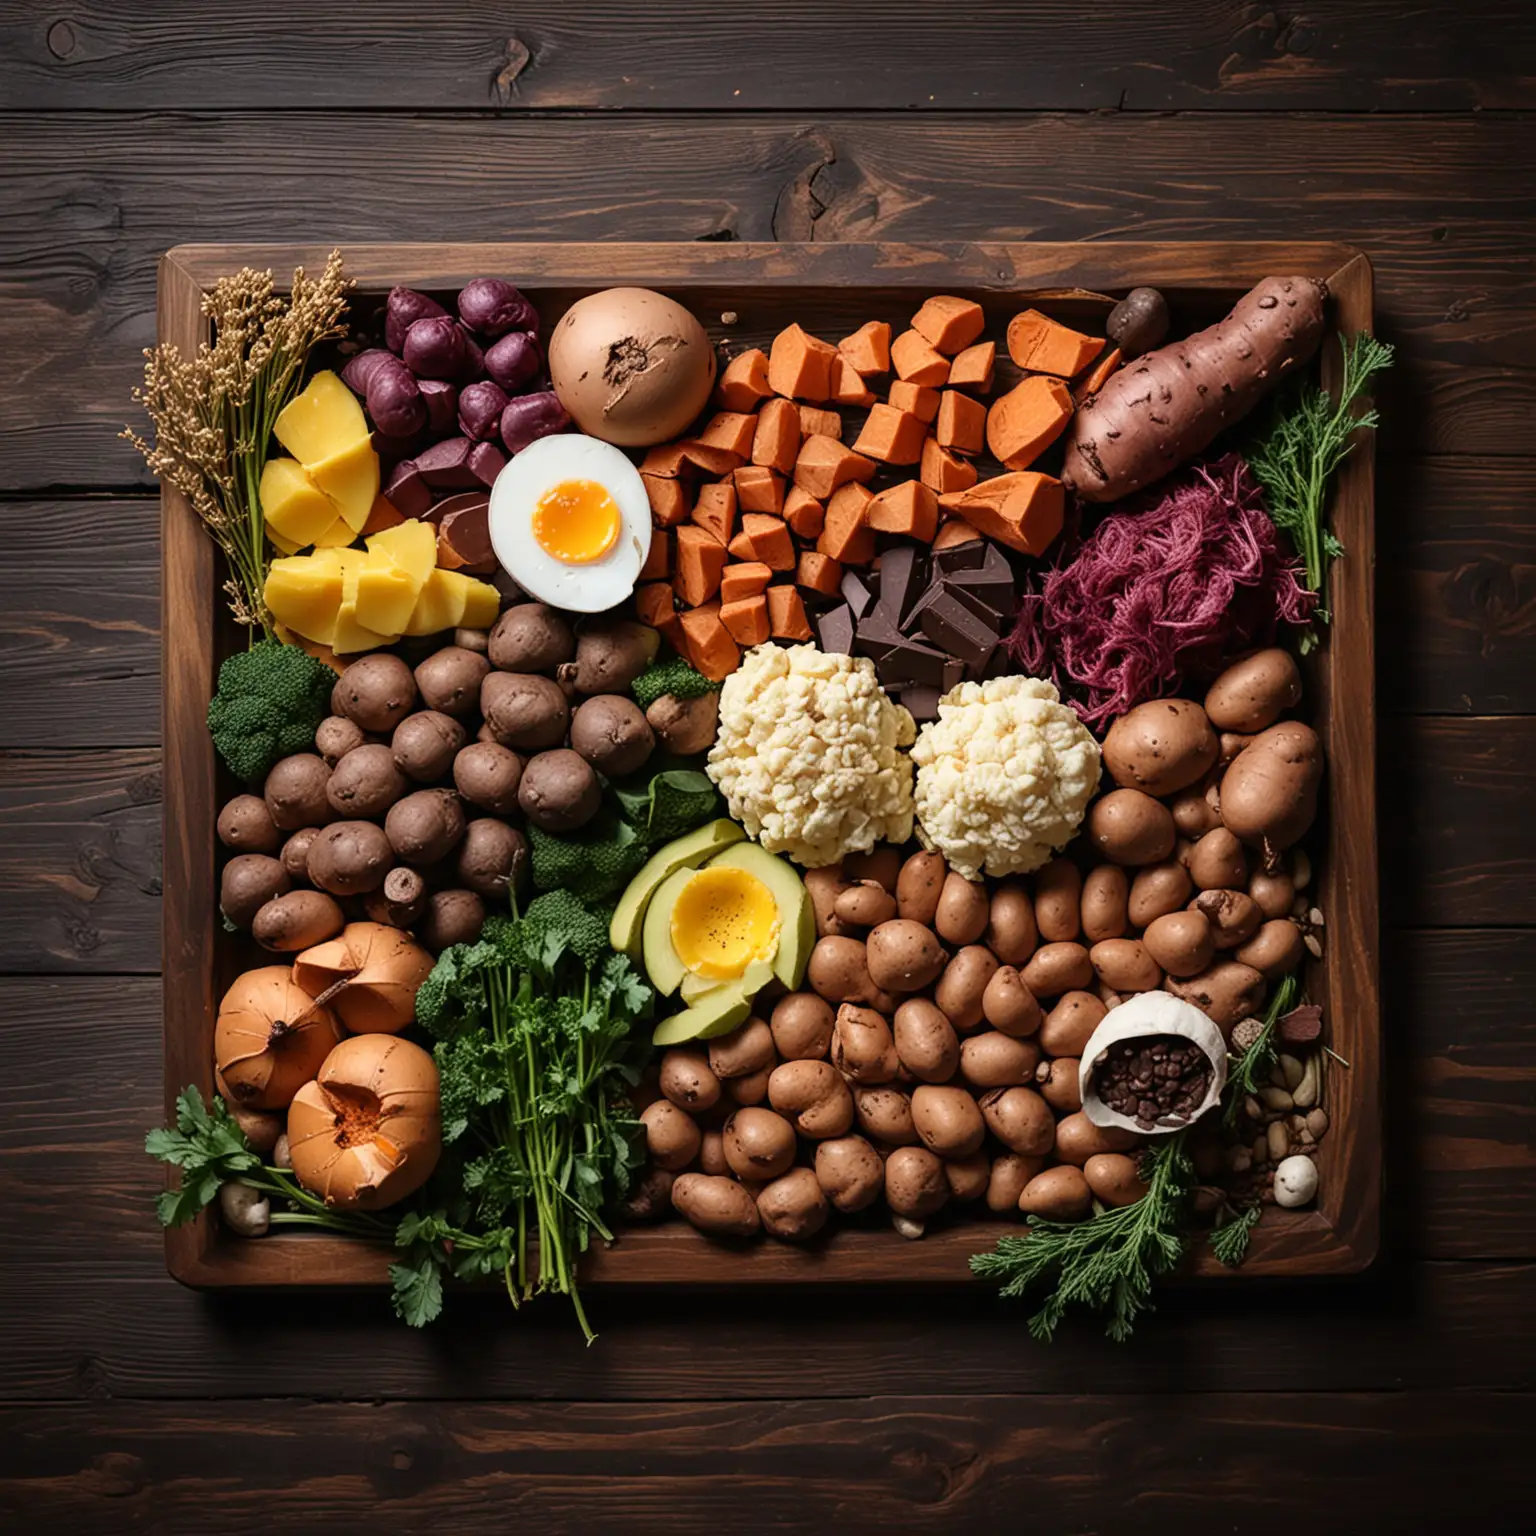 appetizing, attractive arrangement of foods on dark wooden table. foods to include: wild yams, cruciferous vegetables, dark chocolate, legumes, whole grains, lean meats, and eggs